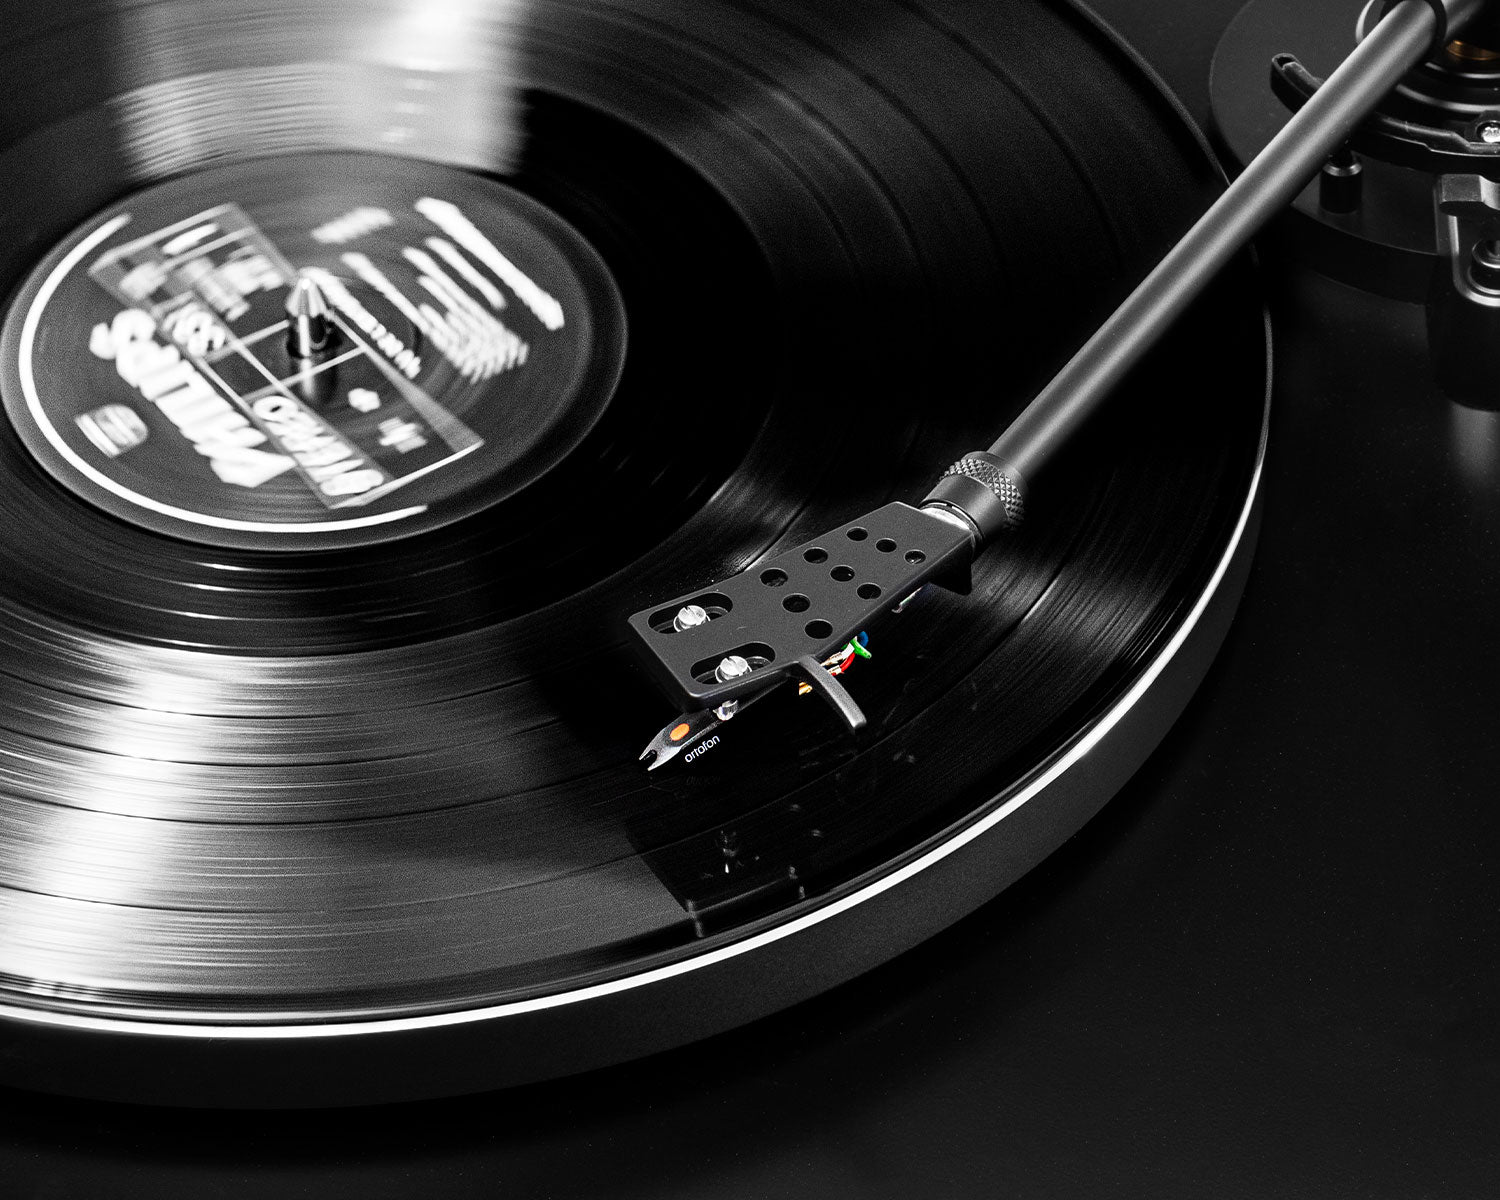 Top Vinyl Accessories Every Record Enthusiast Should Own 